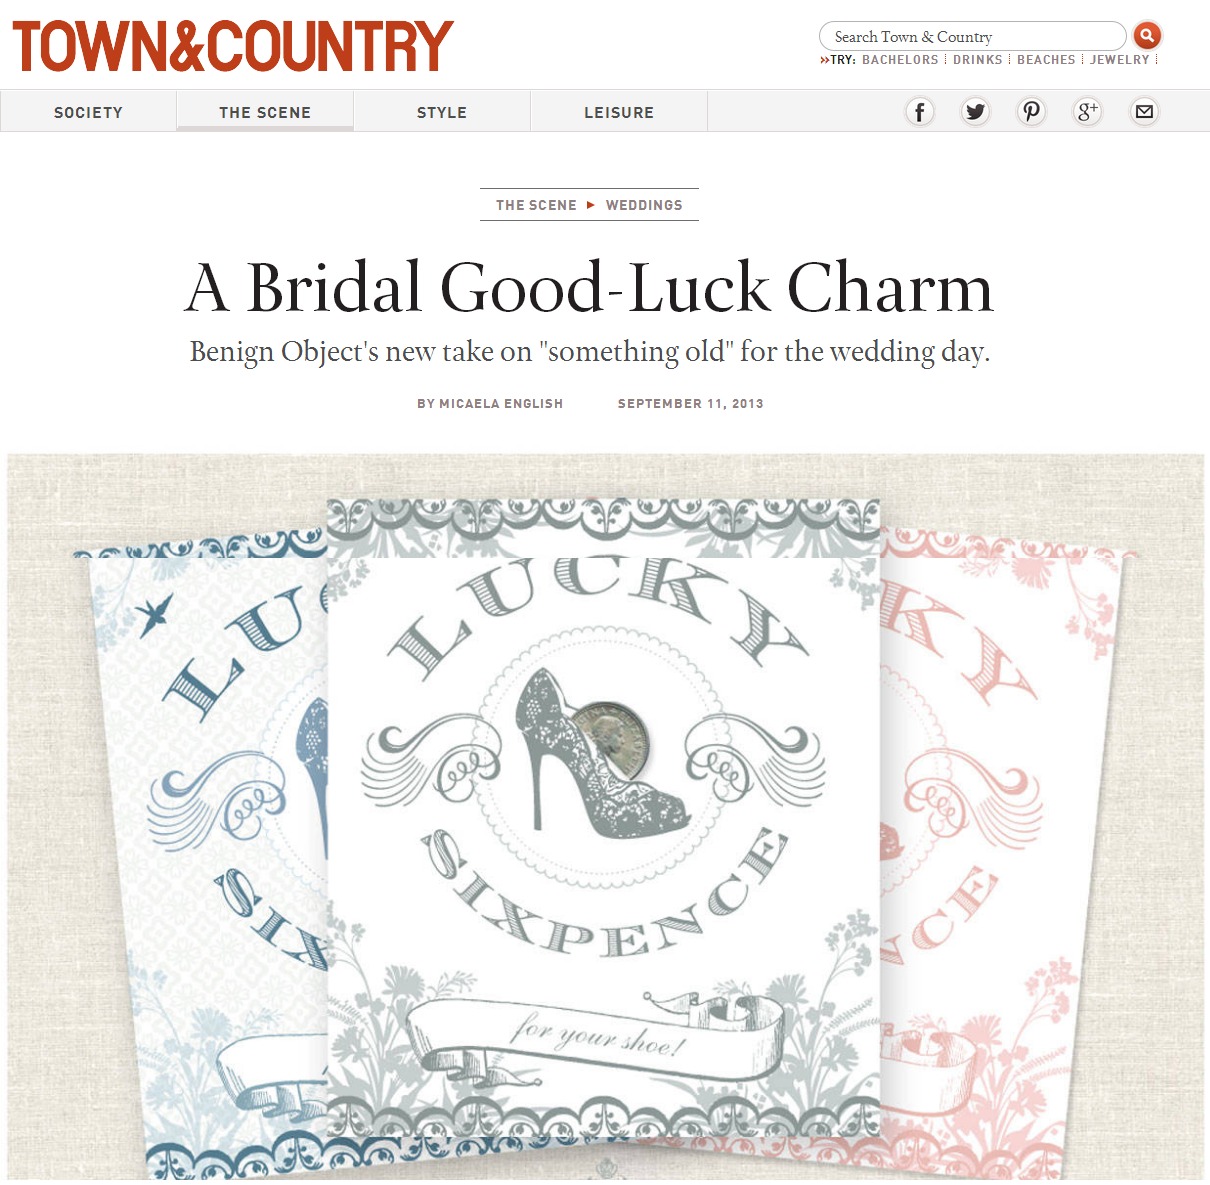 Town & Country Weddings features Benign Objects